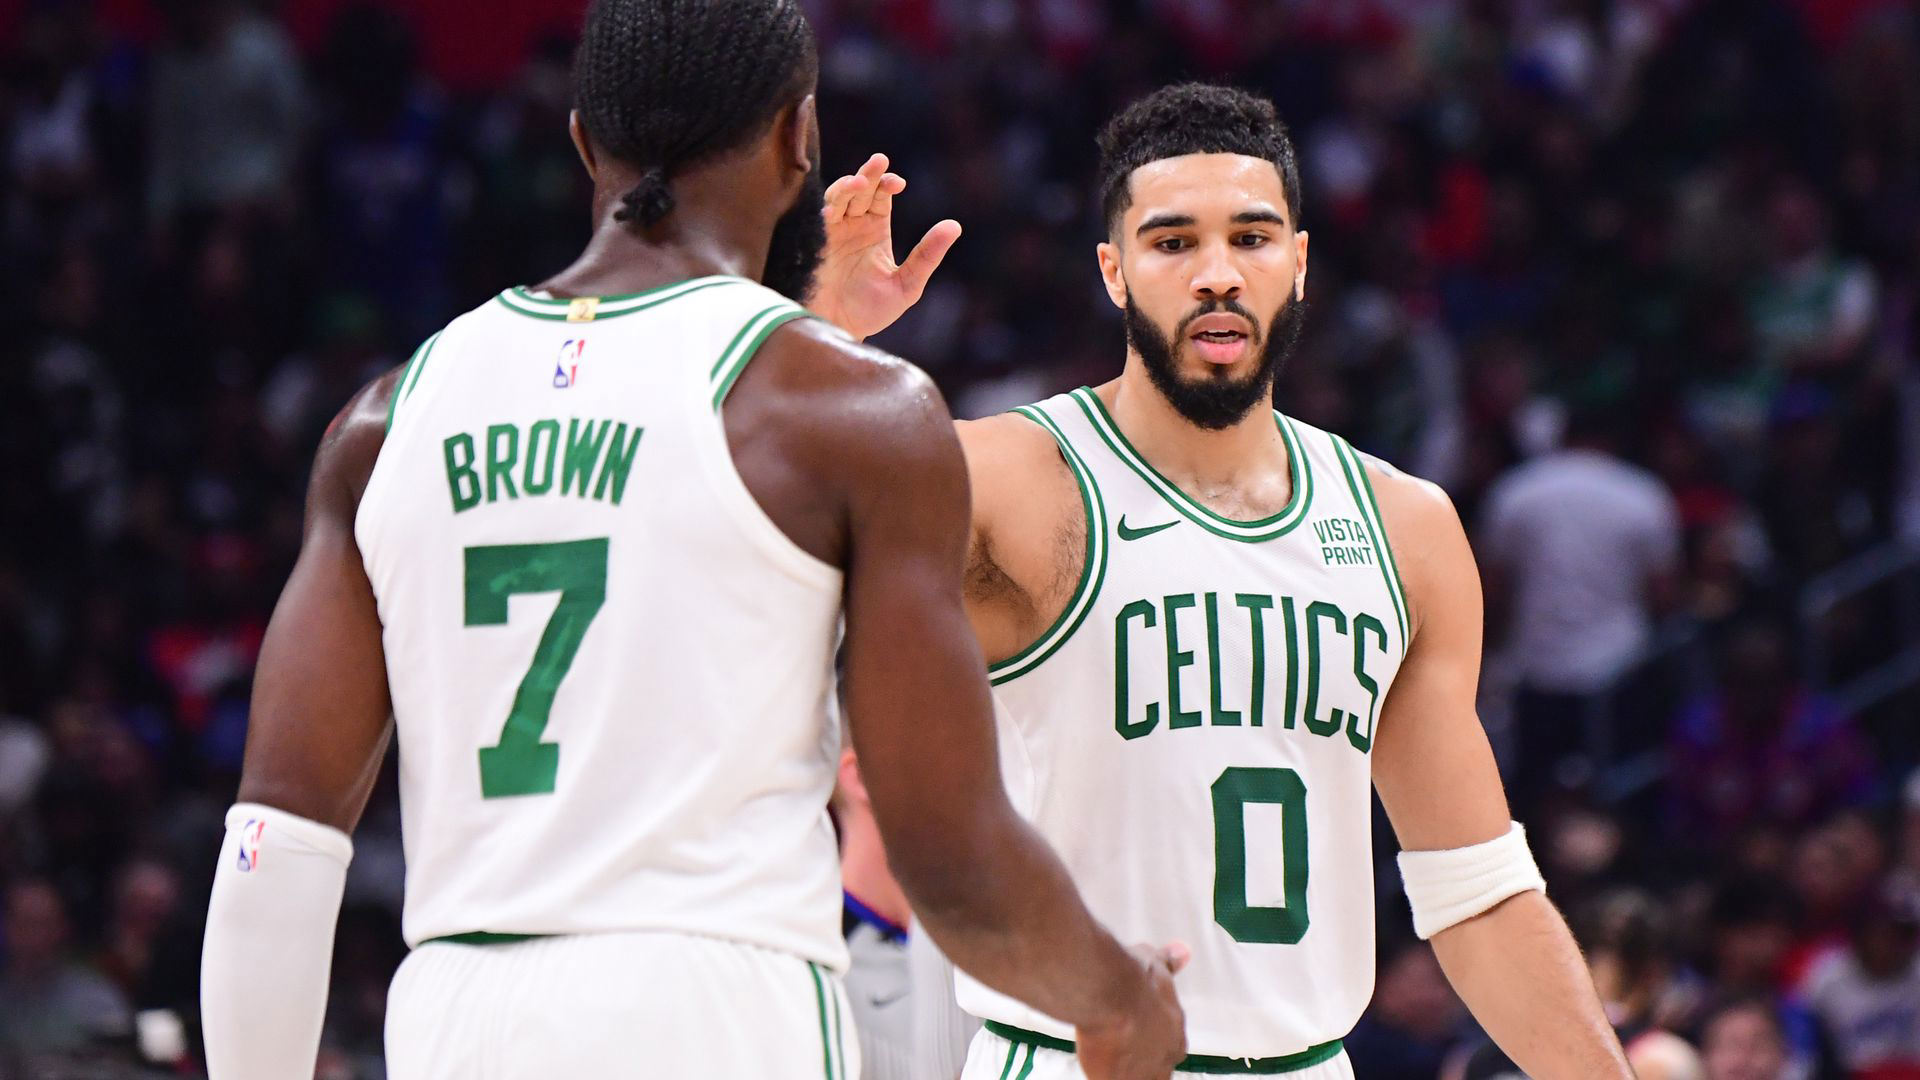 Celtics blow out Clippers, 145-108, improve to league-best 22-6 record